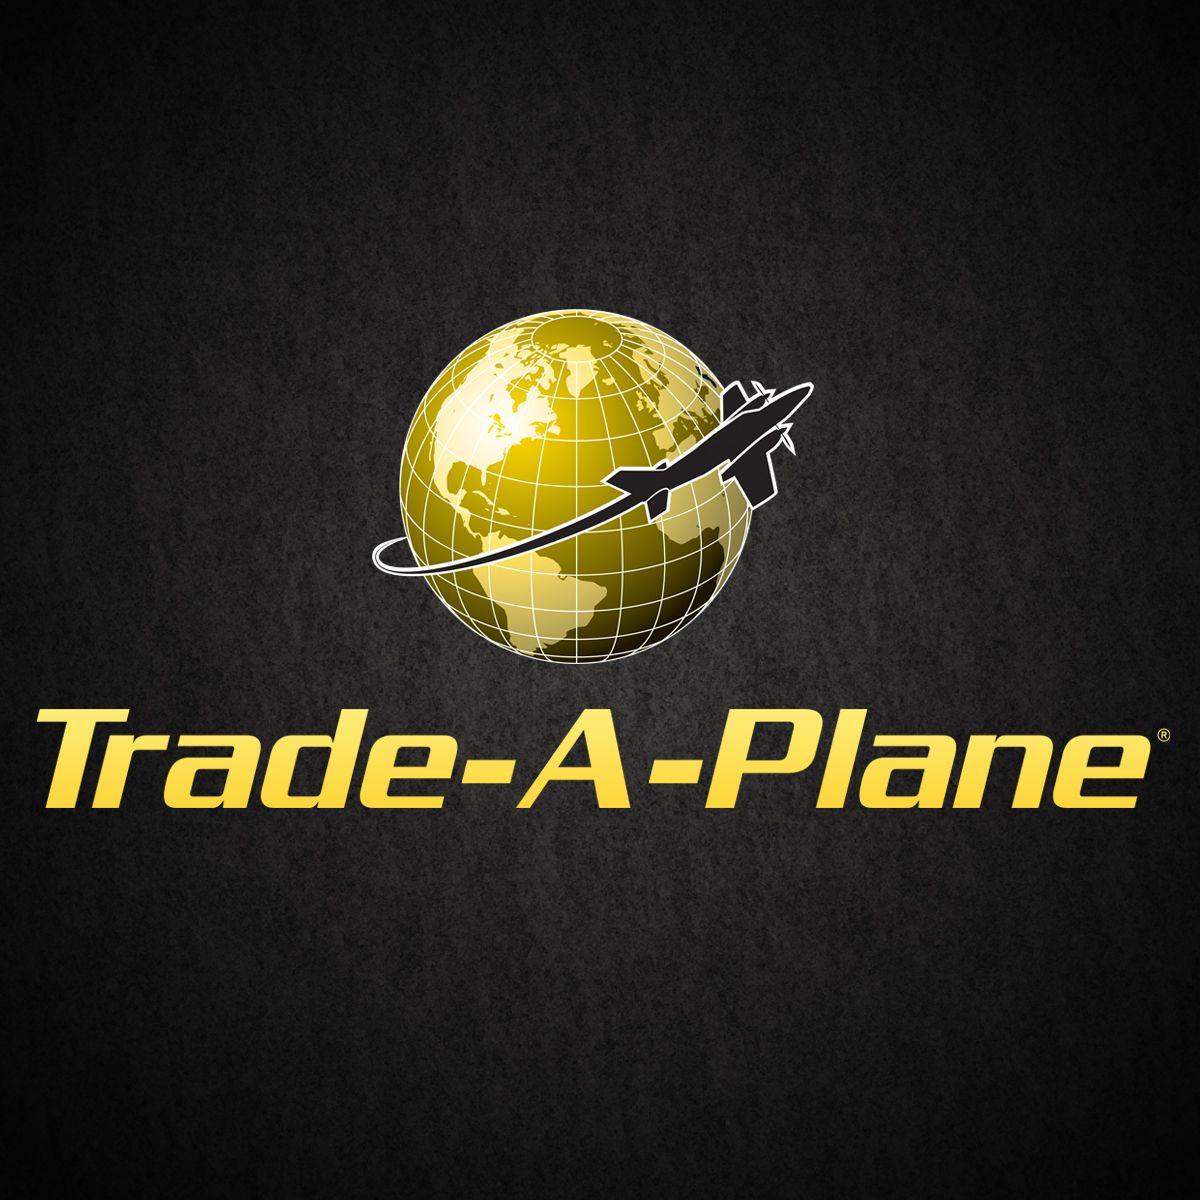 Vintage Aircraft Logo - Search For Aircraft & Aircraft Parts Sale, Jets